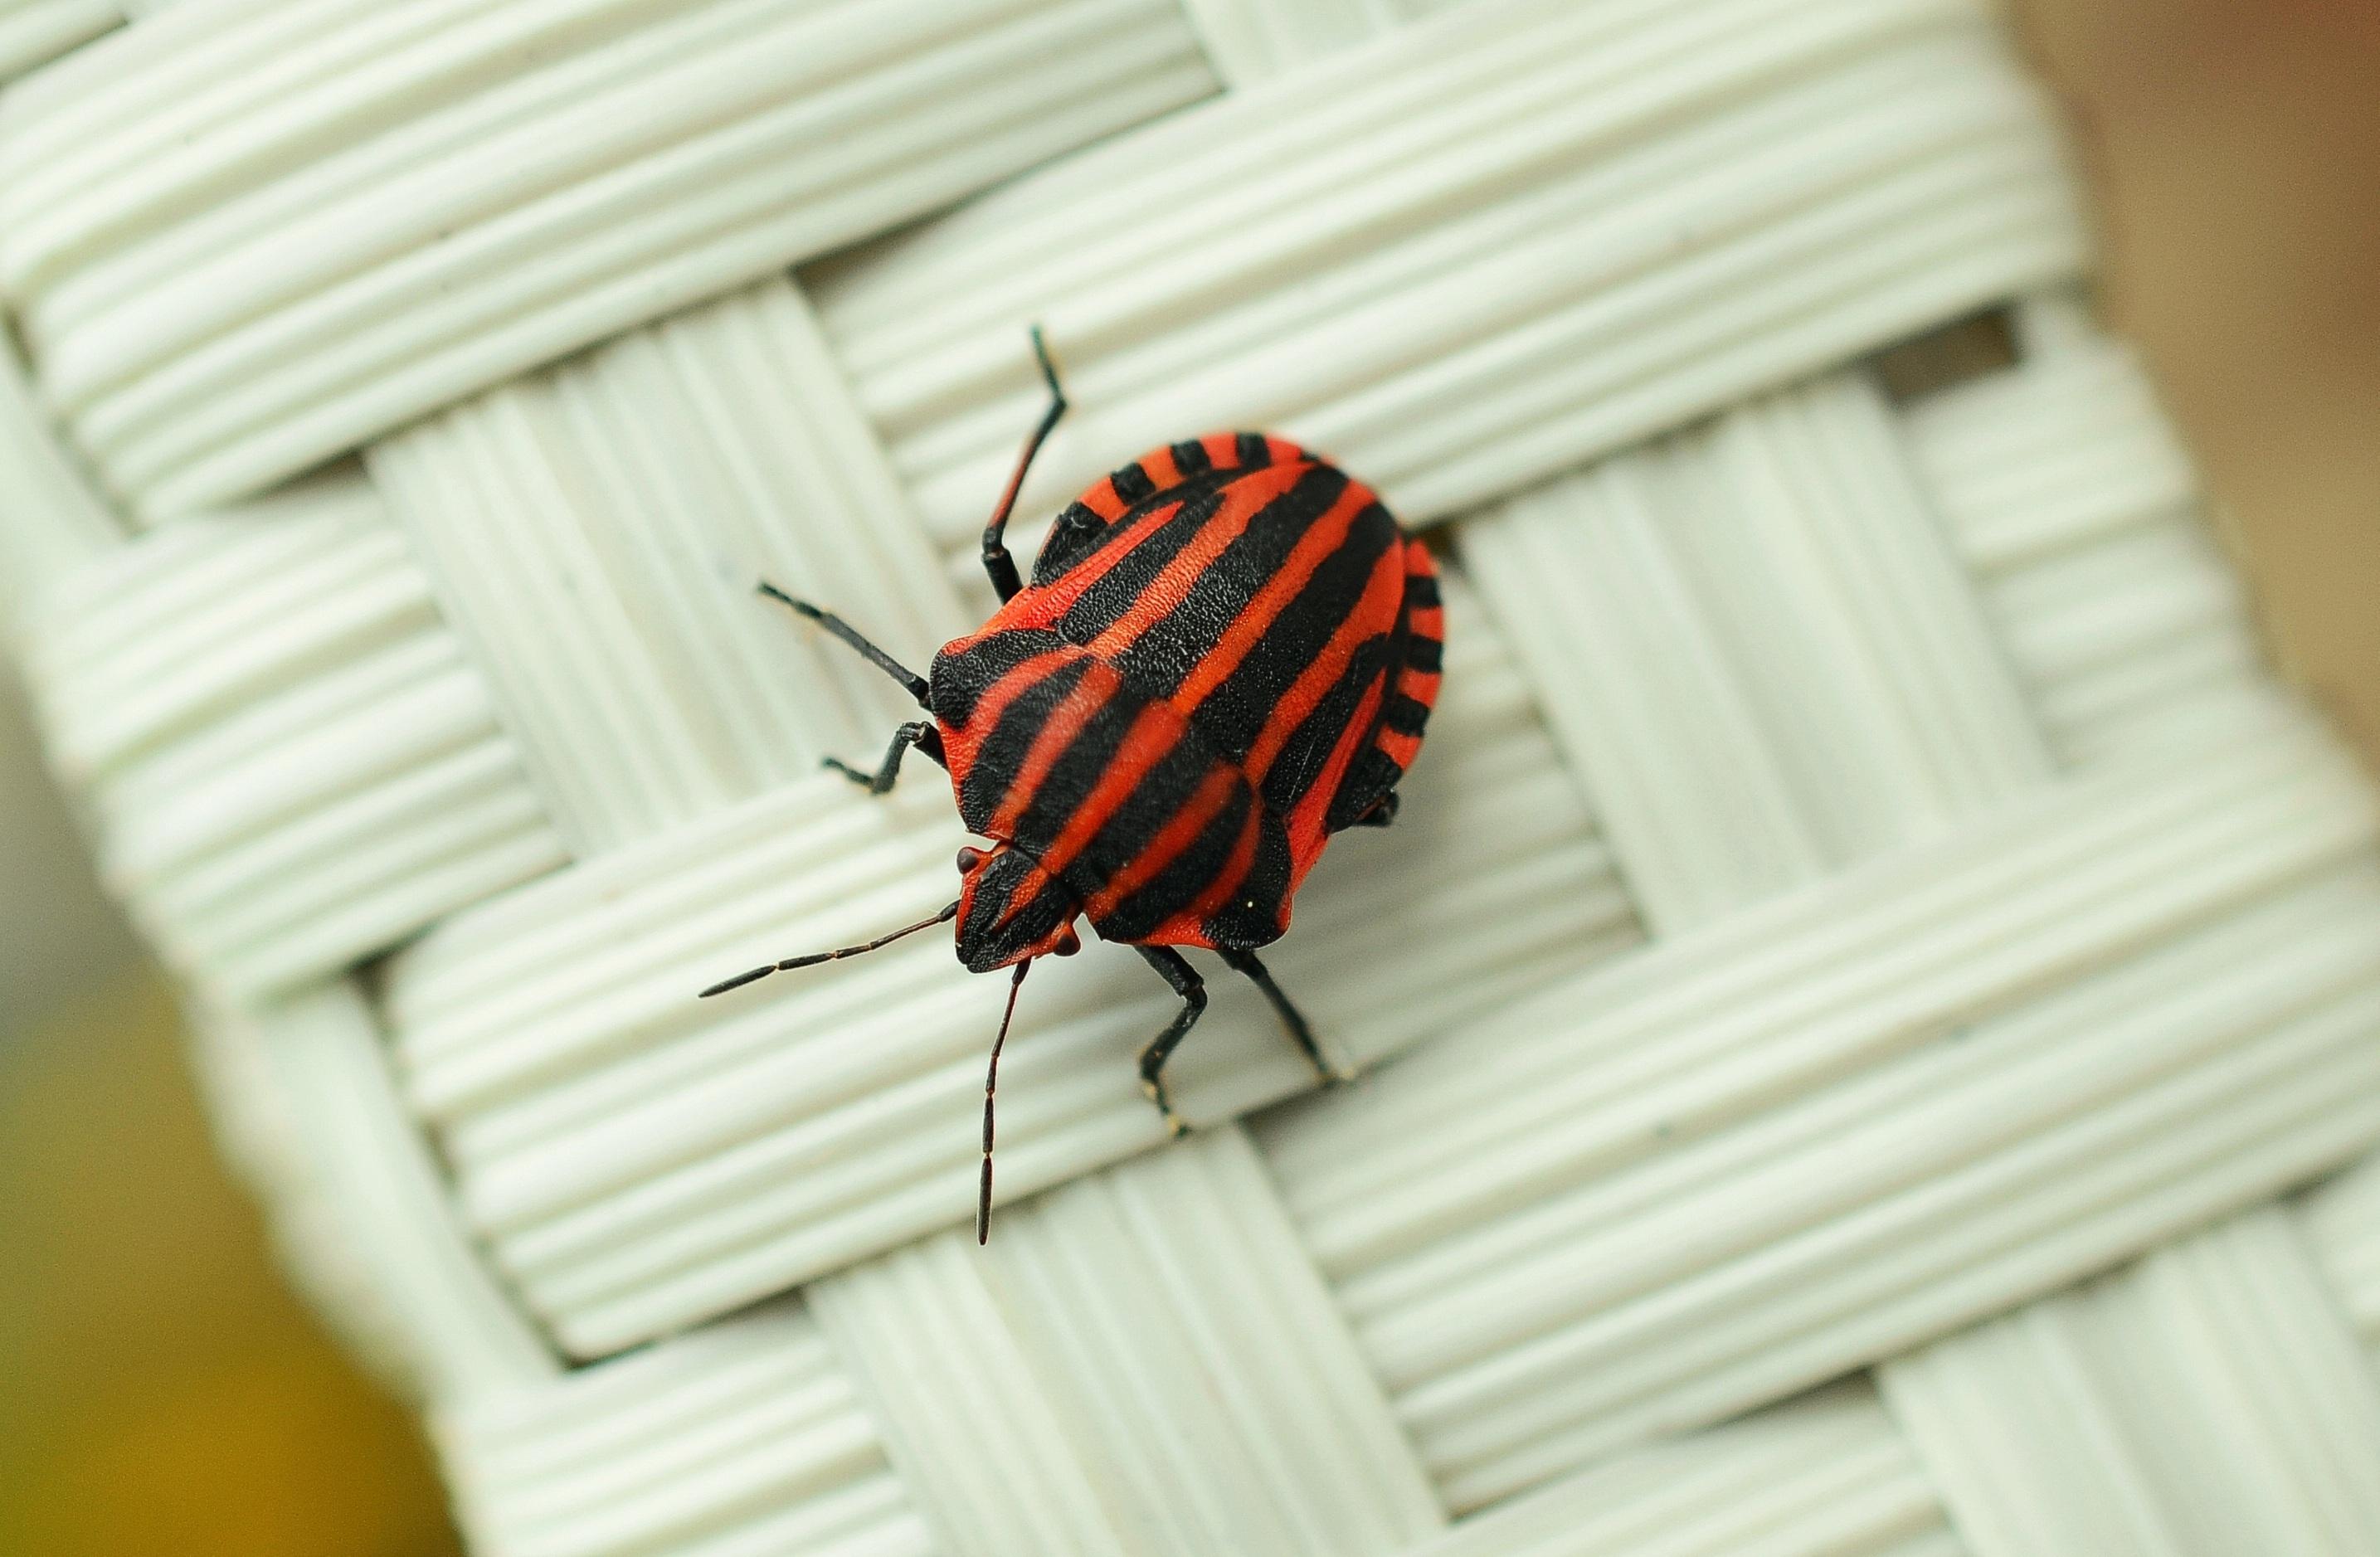 What happens if you accidentally eat a stink bug? 